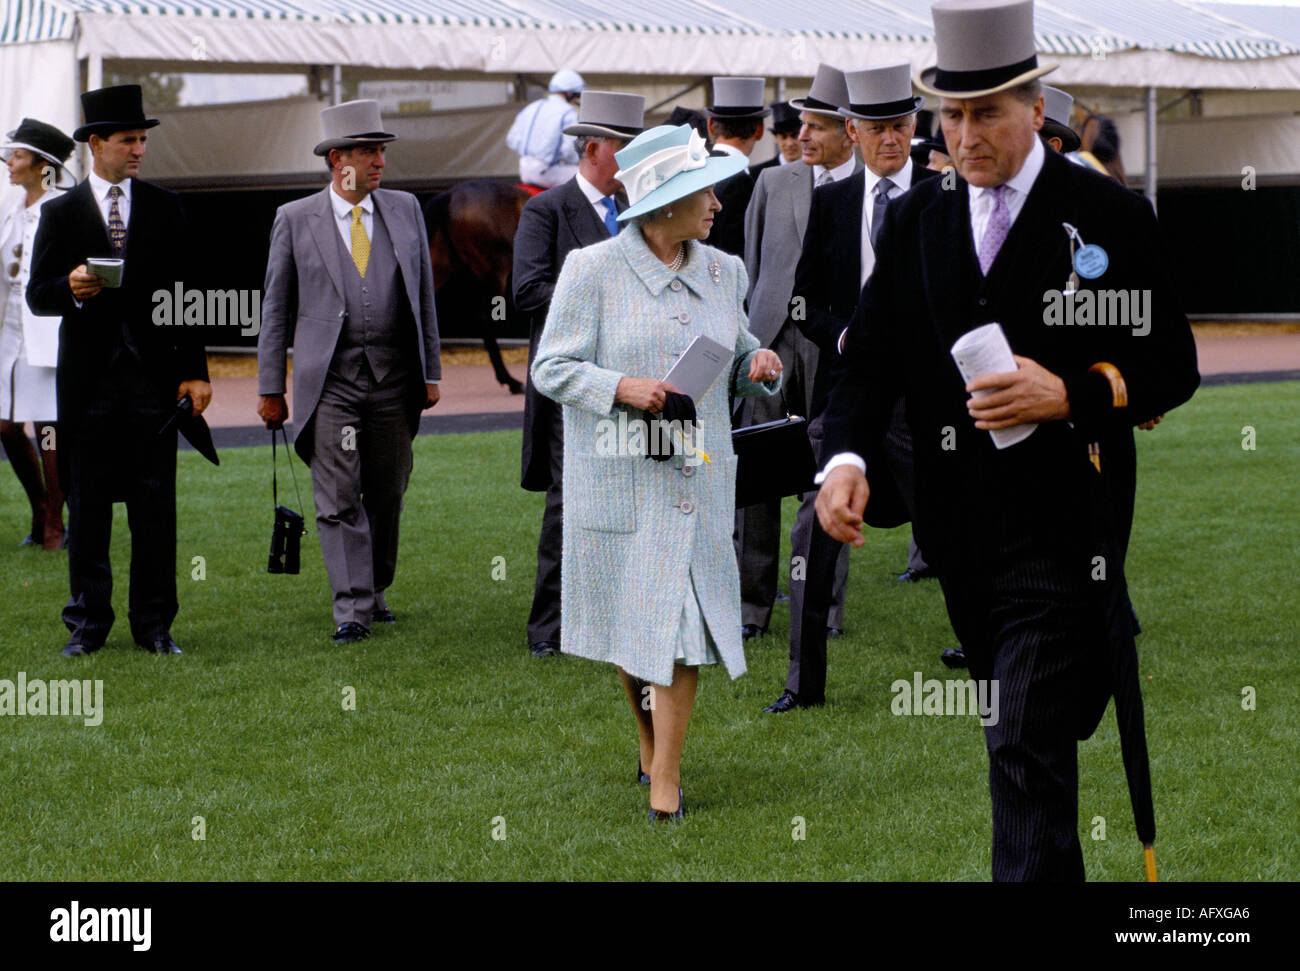 Queen Elizabeth II at the Derby Day  Epsom Downs Race Course Surrey UK  1995. In foreground Lord Porchester Earl Carnarvon 1990s HOMER SYKES Stock Photo